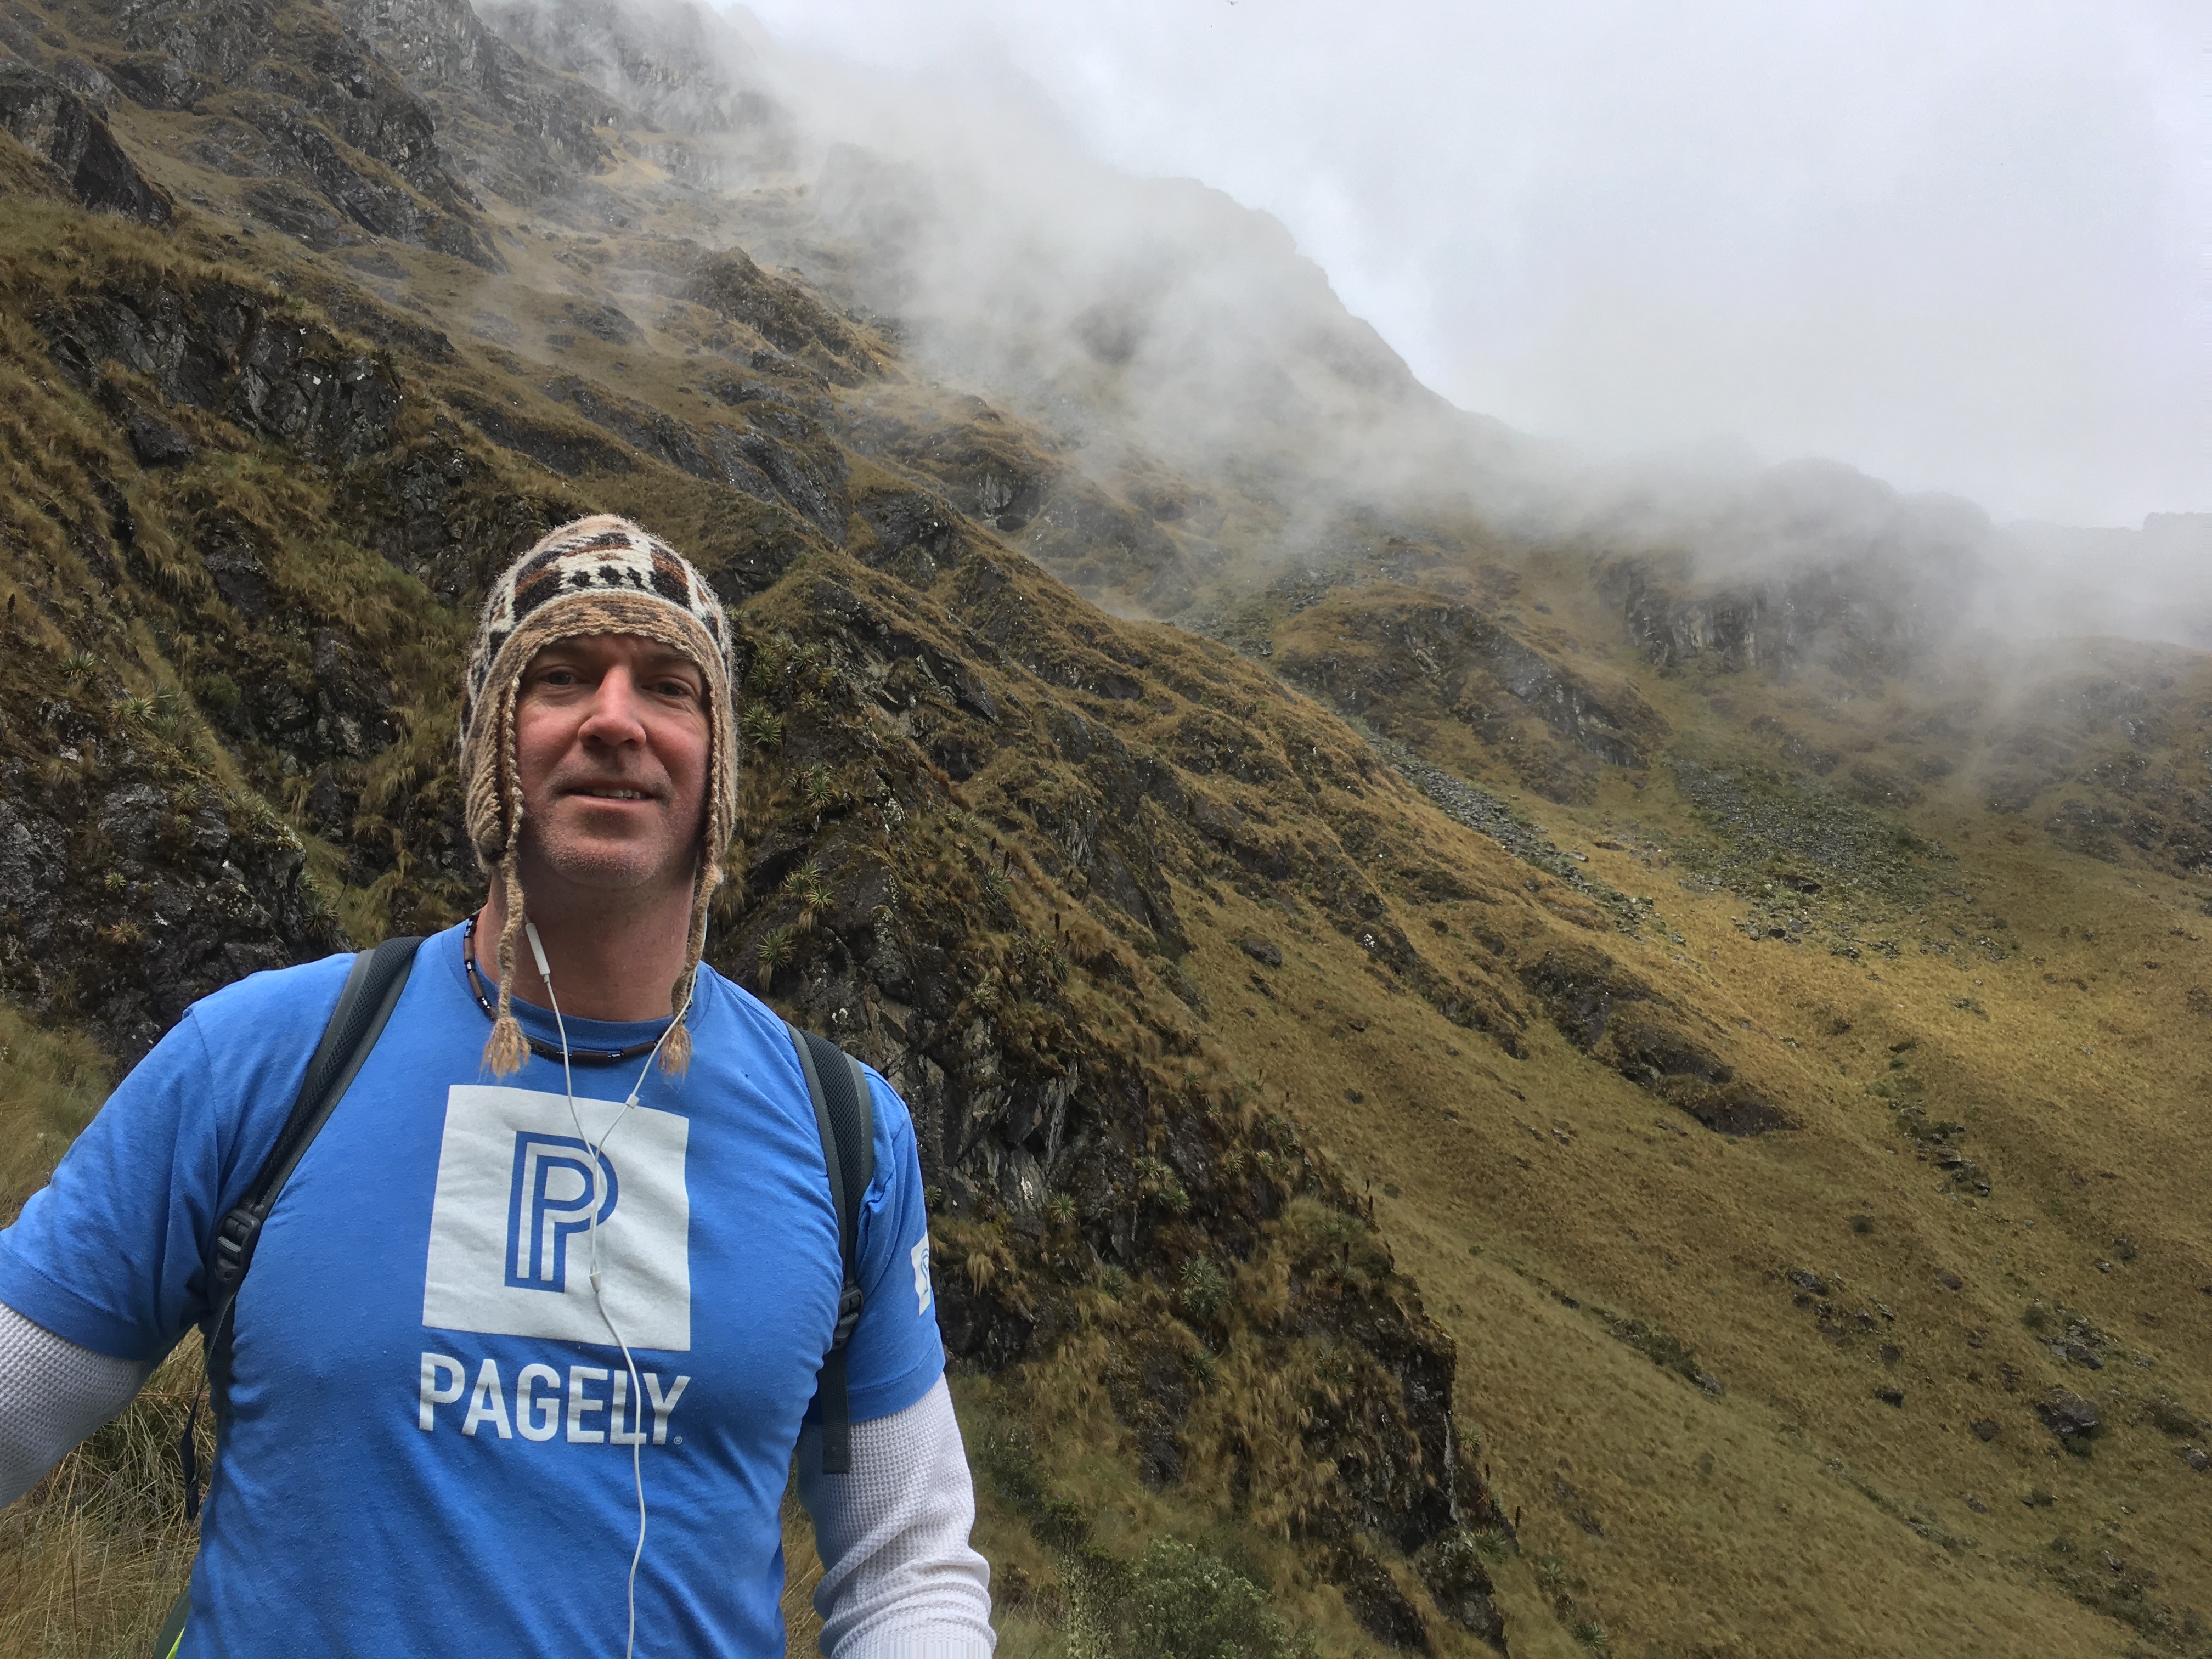 Hiking "Dead Woman's Pass" on the Inca Trail